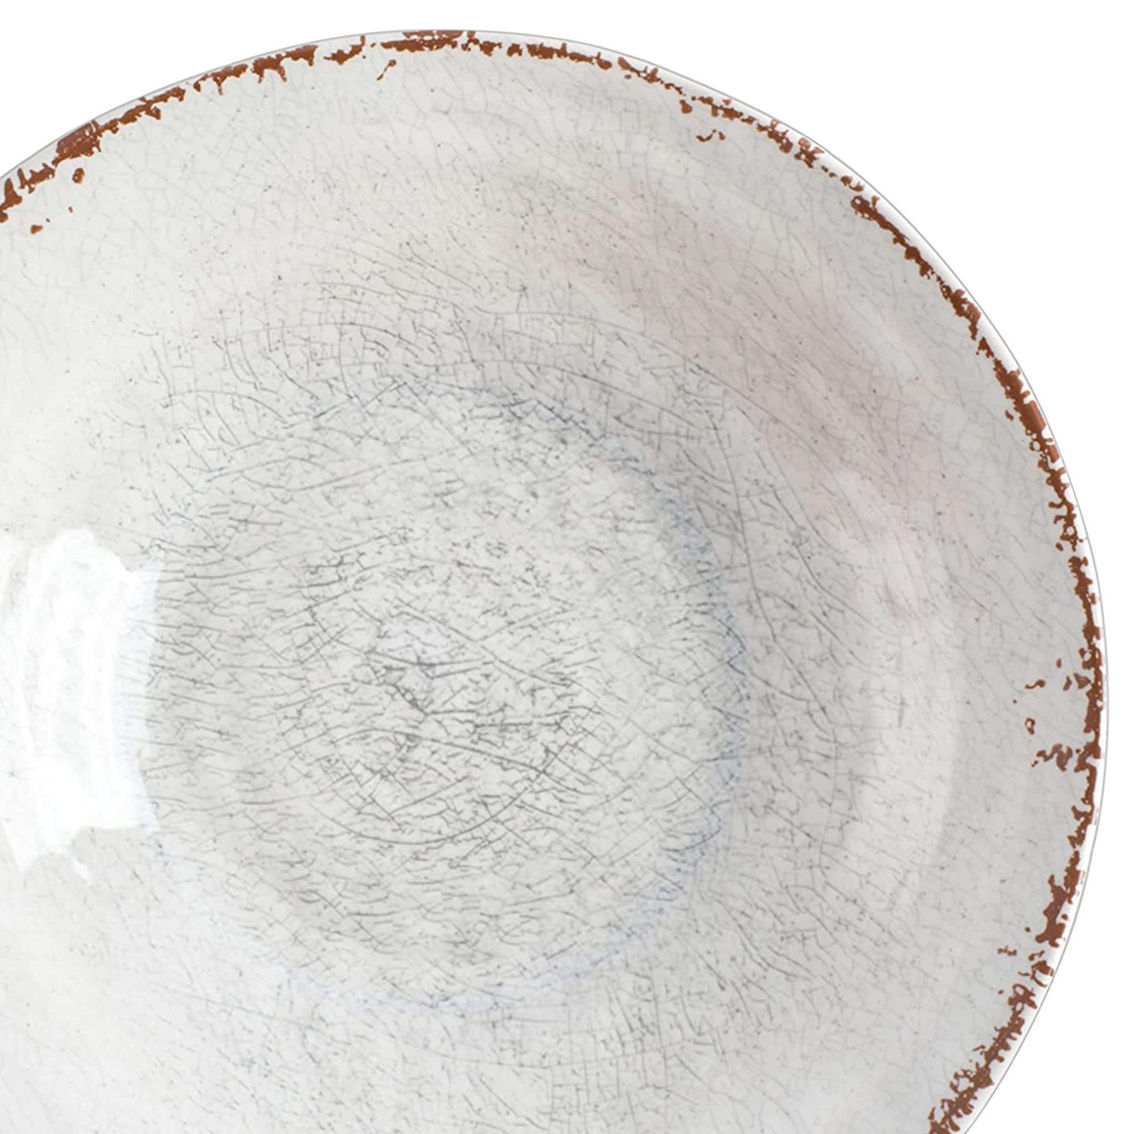 Laurie Gates Mauna 3 Piece Melamine Serving Bowl Set in White with Serving Utens - Image 3 of 5